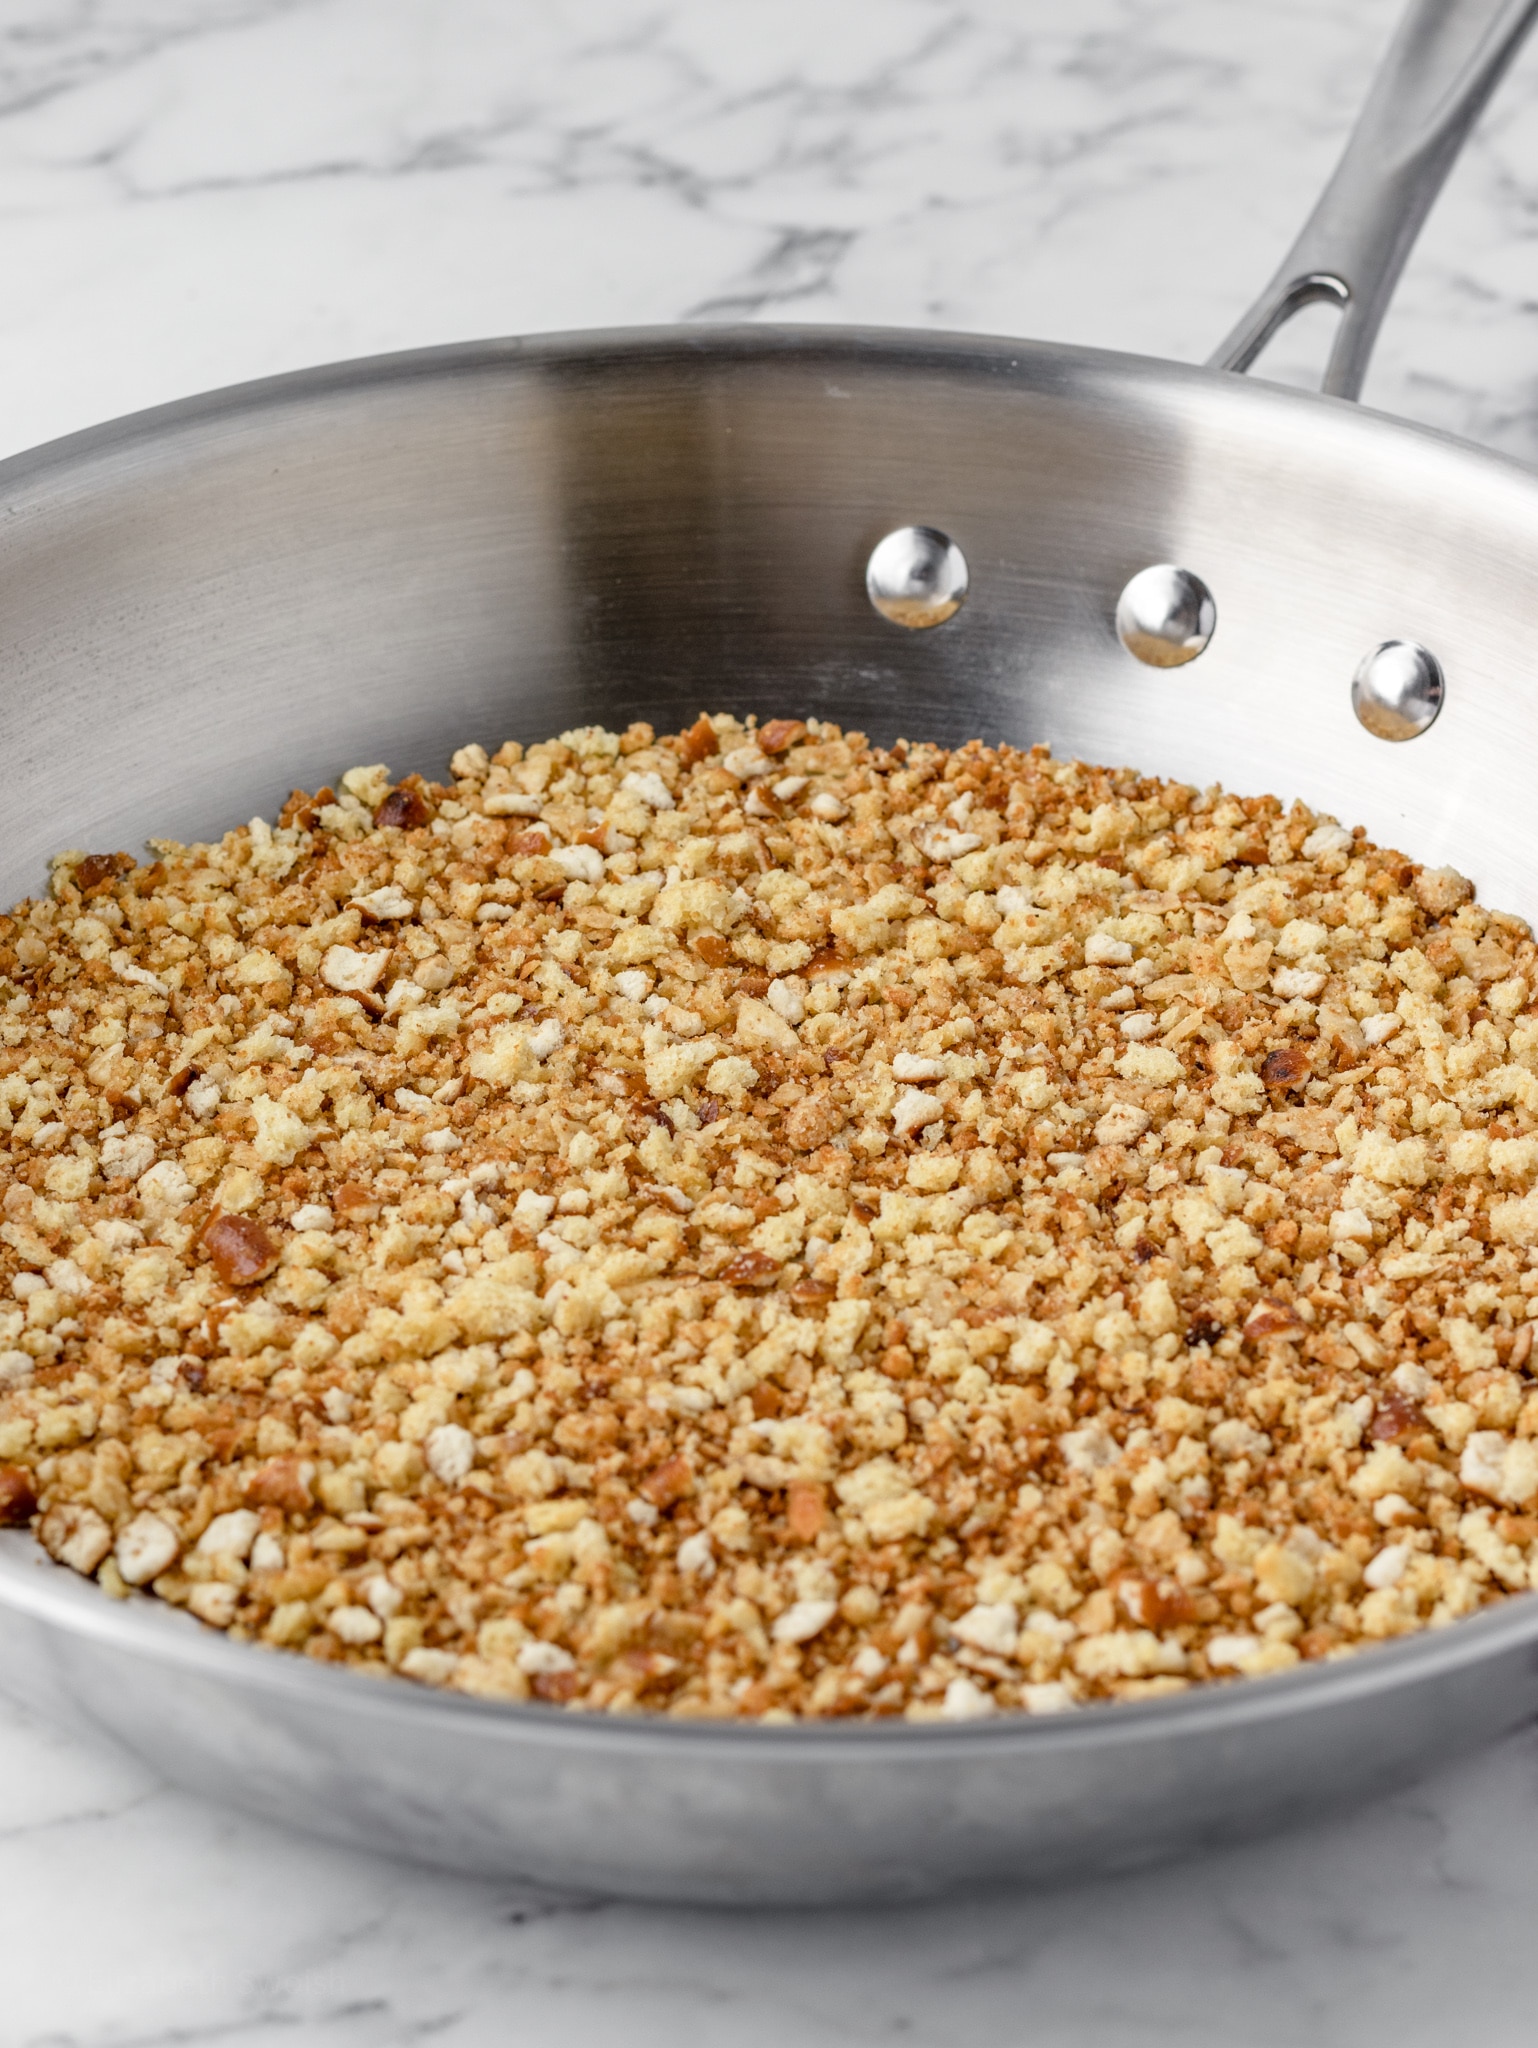 Toasted bread crumbs for topping